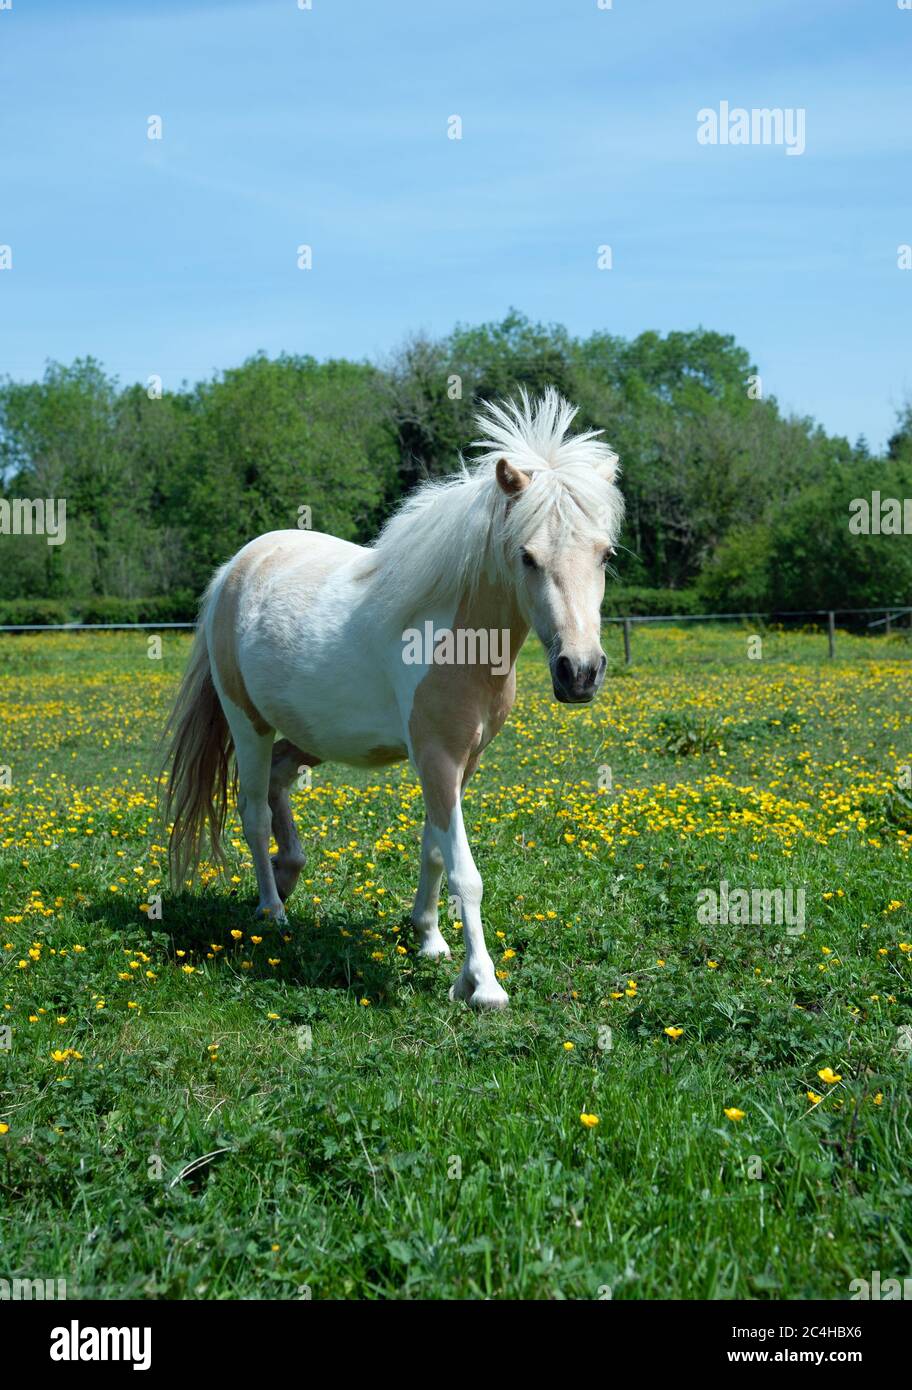 Horse on a field in the countryside, Ireland Stock Photo